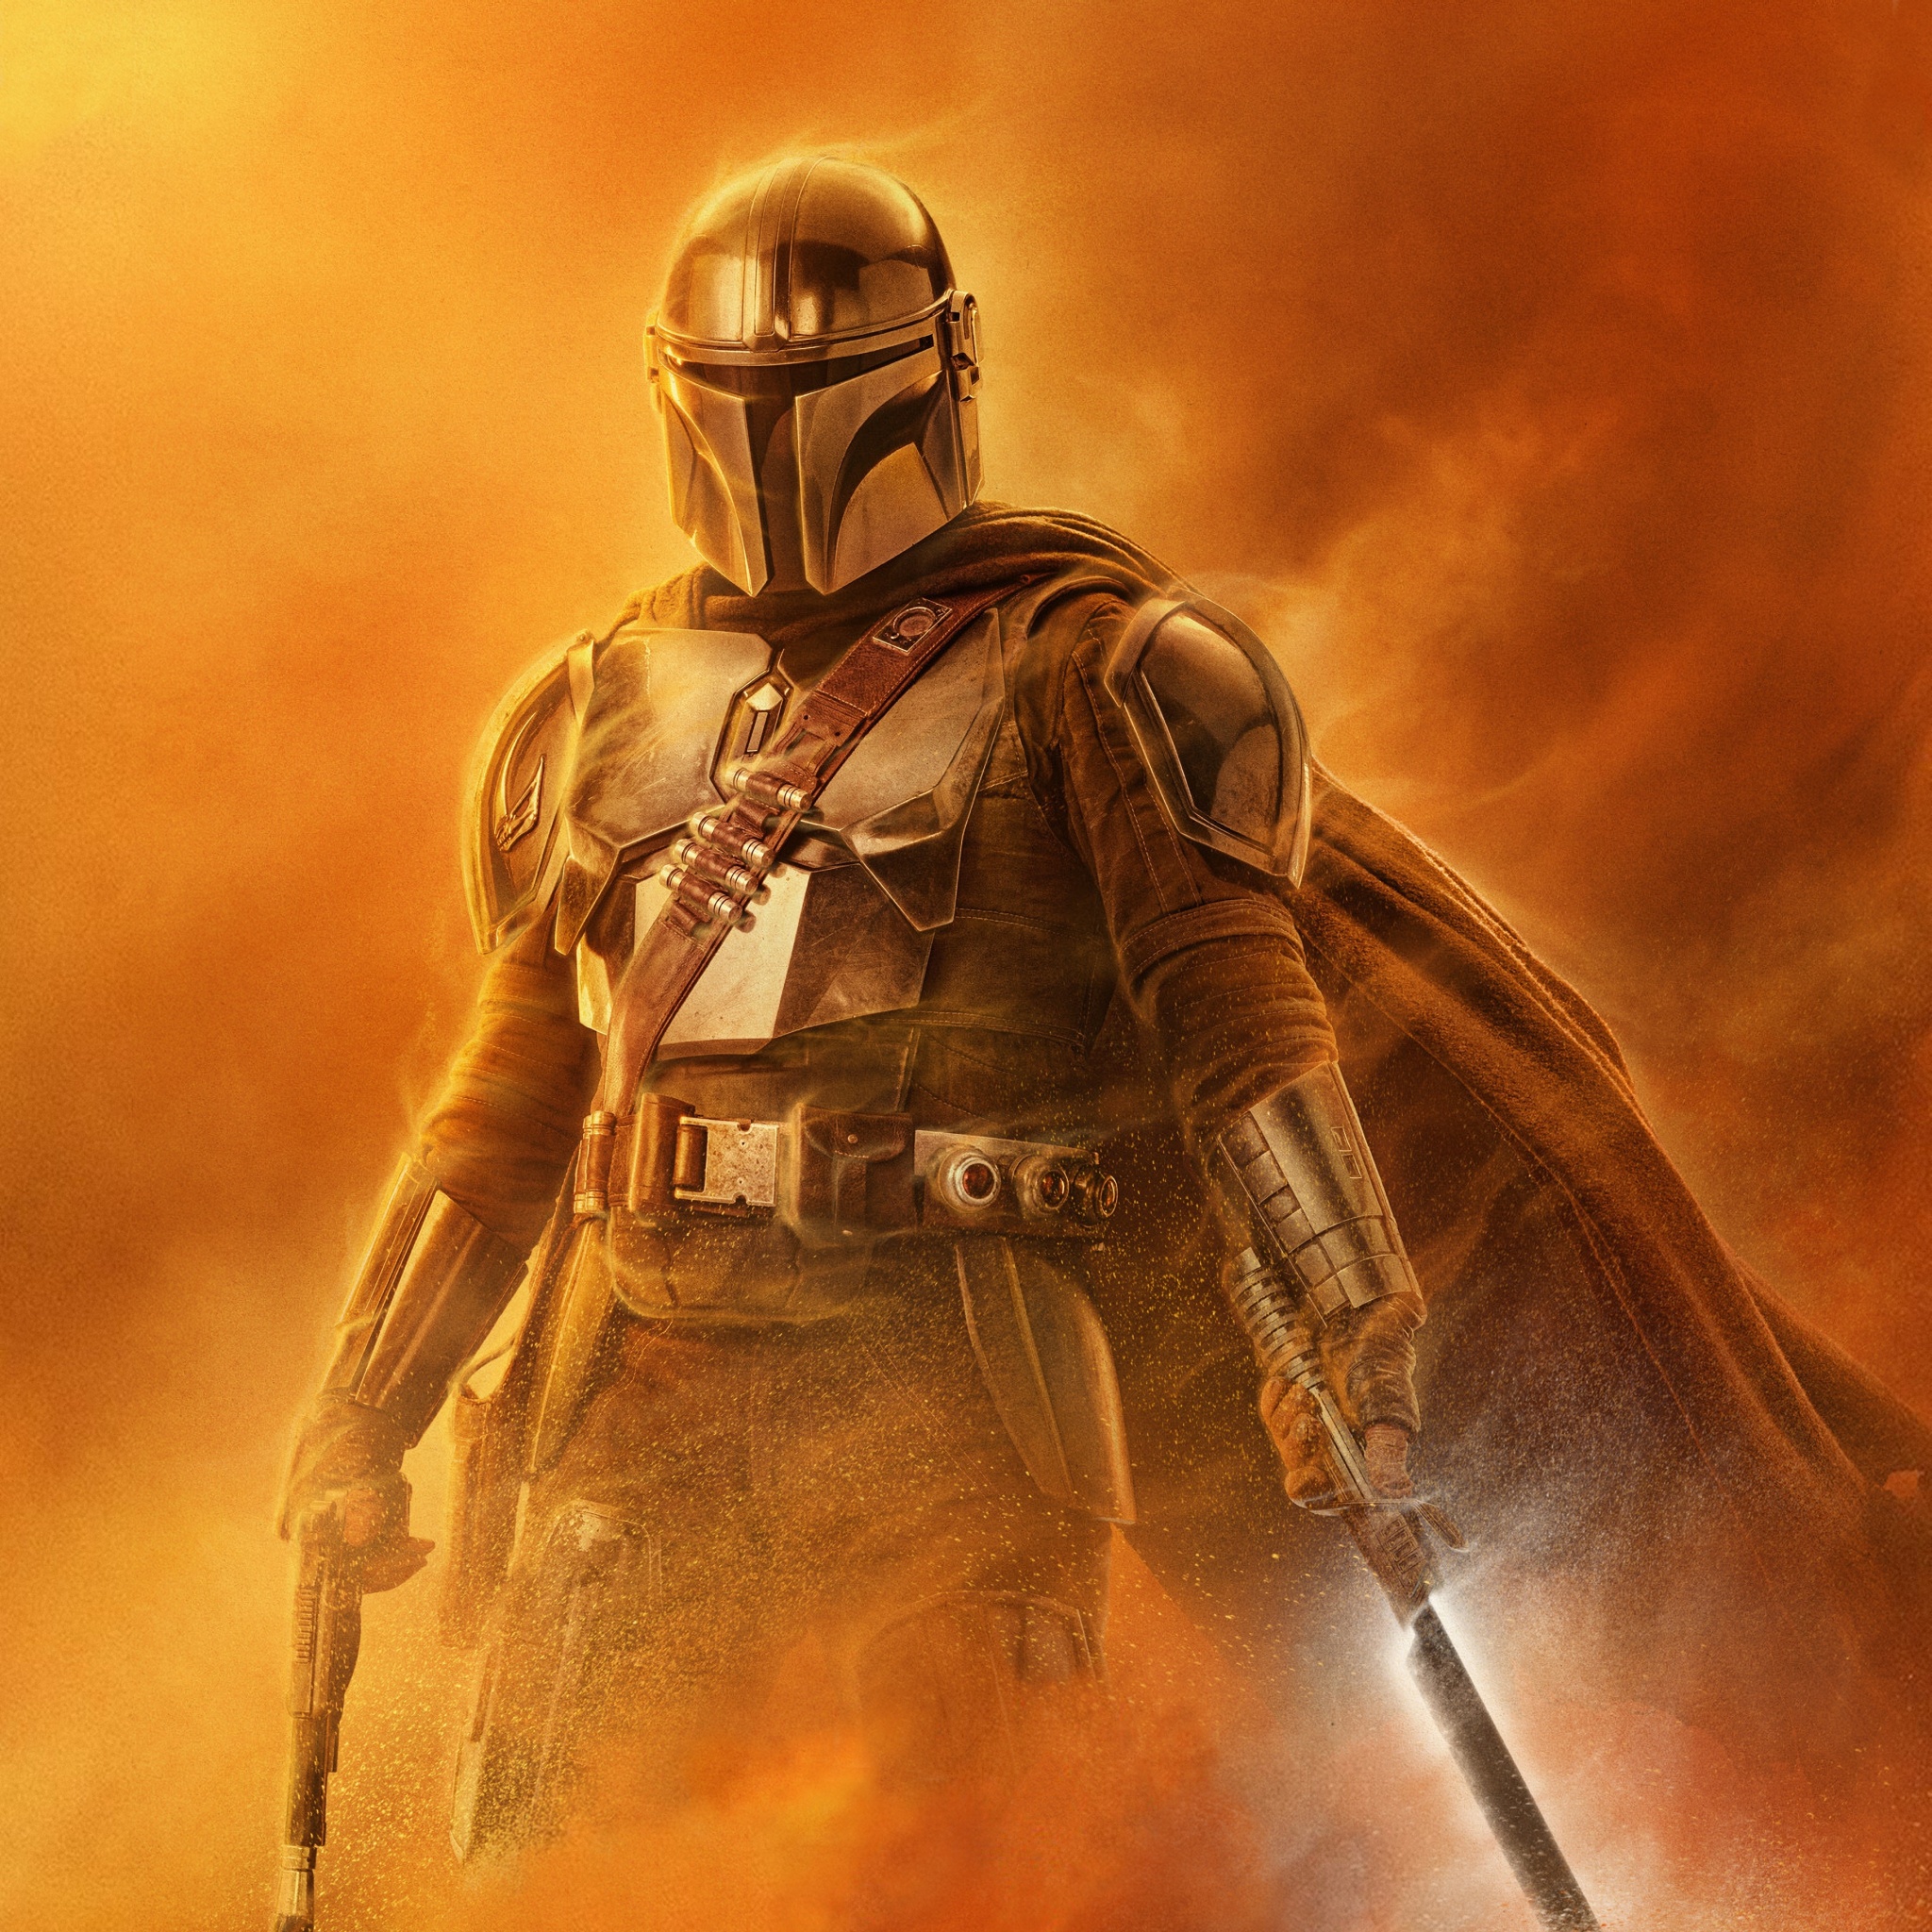 The Mandalorian Season 2 4k 2021 Wallpaper,HD Tv Shows Wallpapers,4k  Wallpapers,Images,Backgrounds,Photos and Pictures